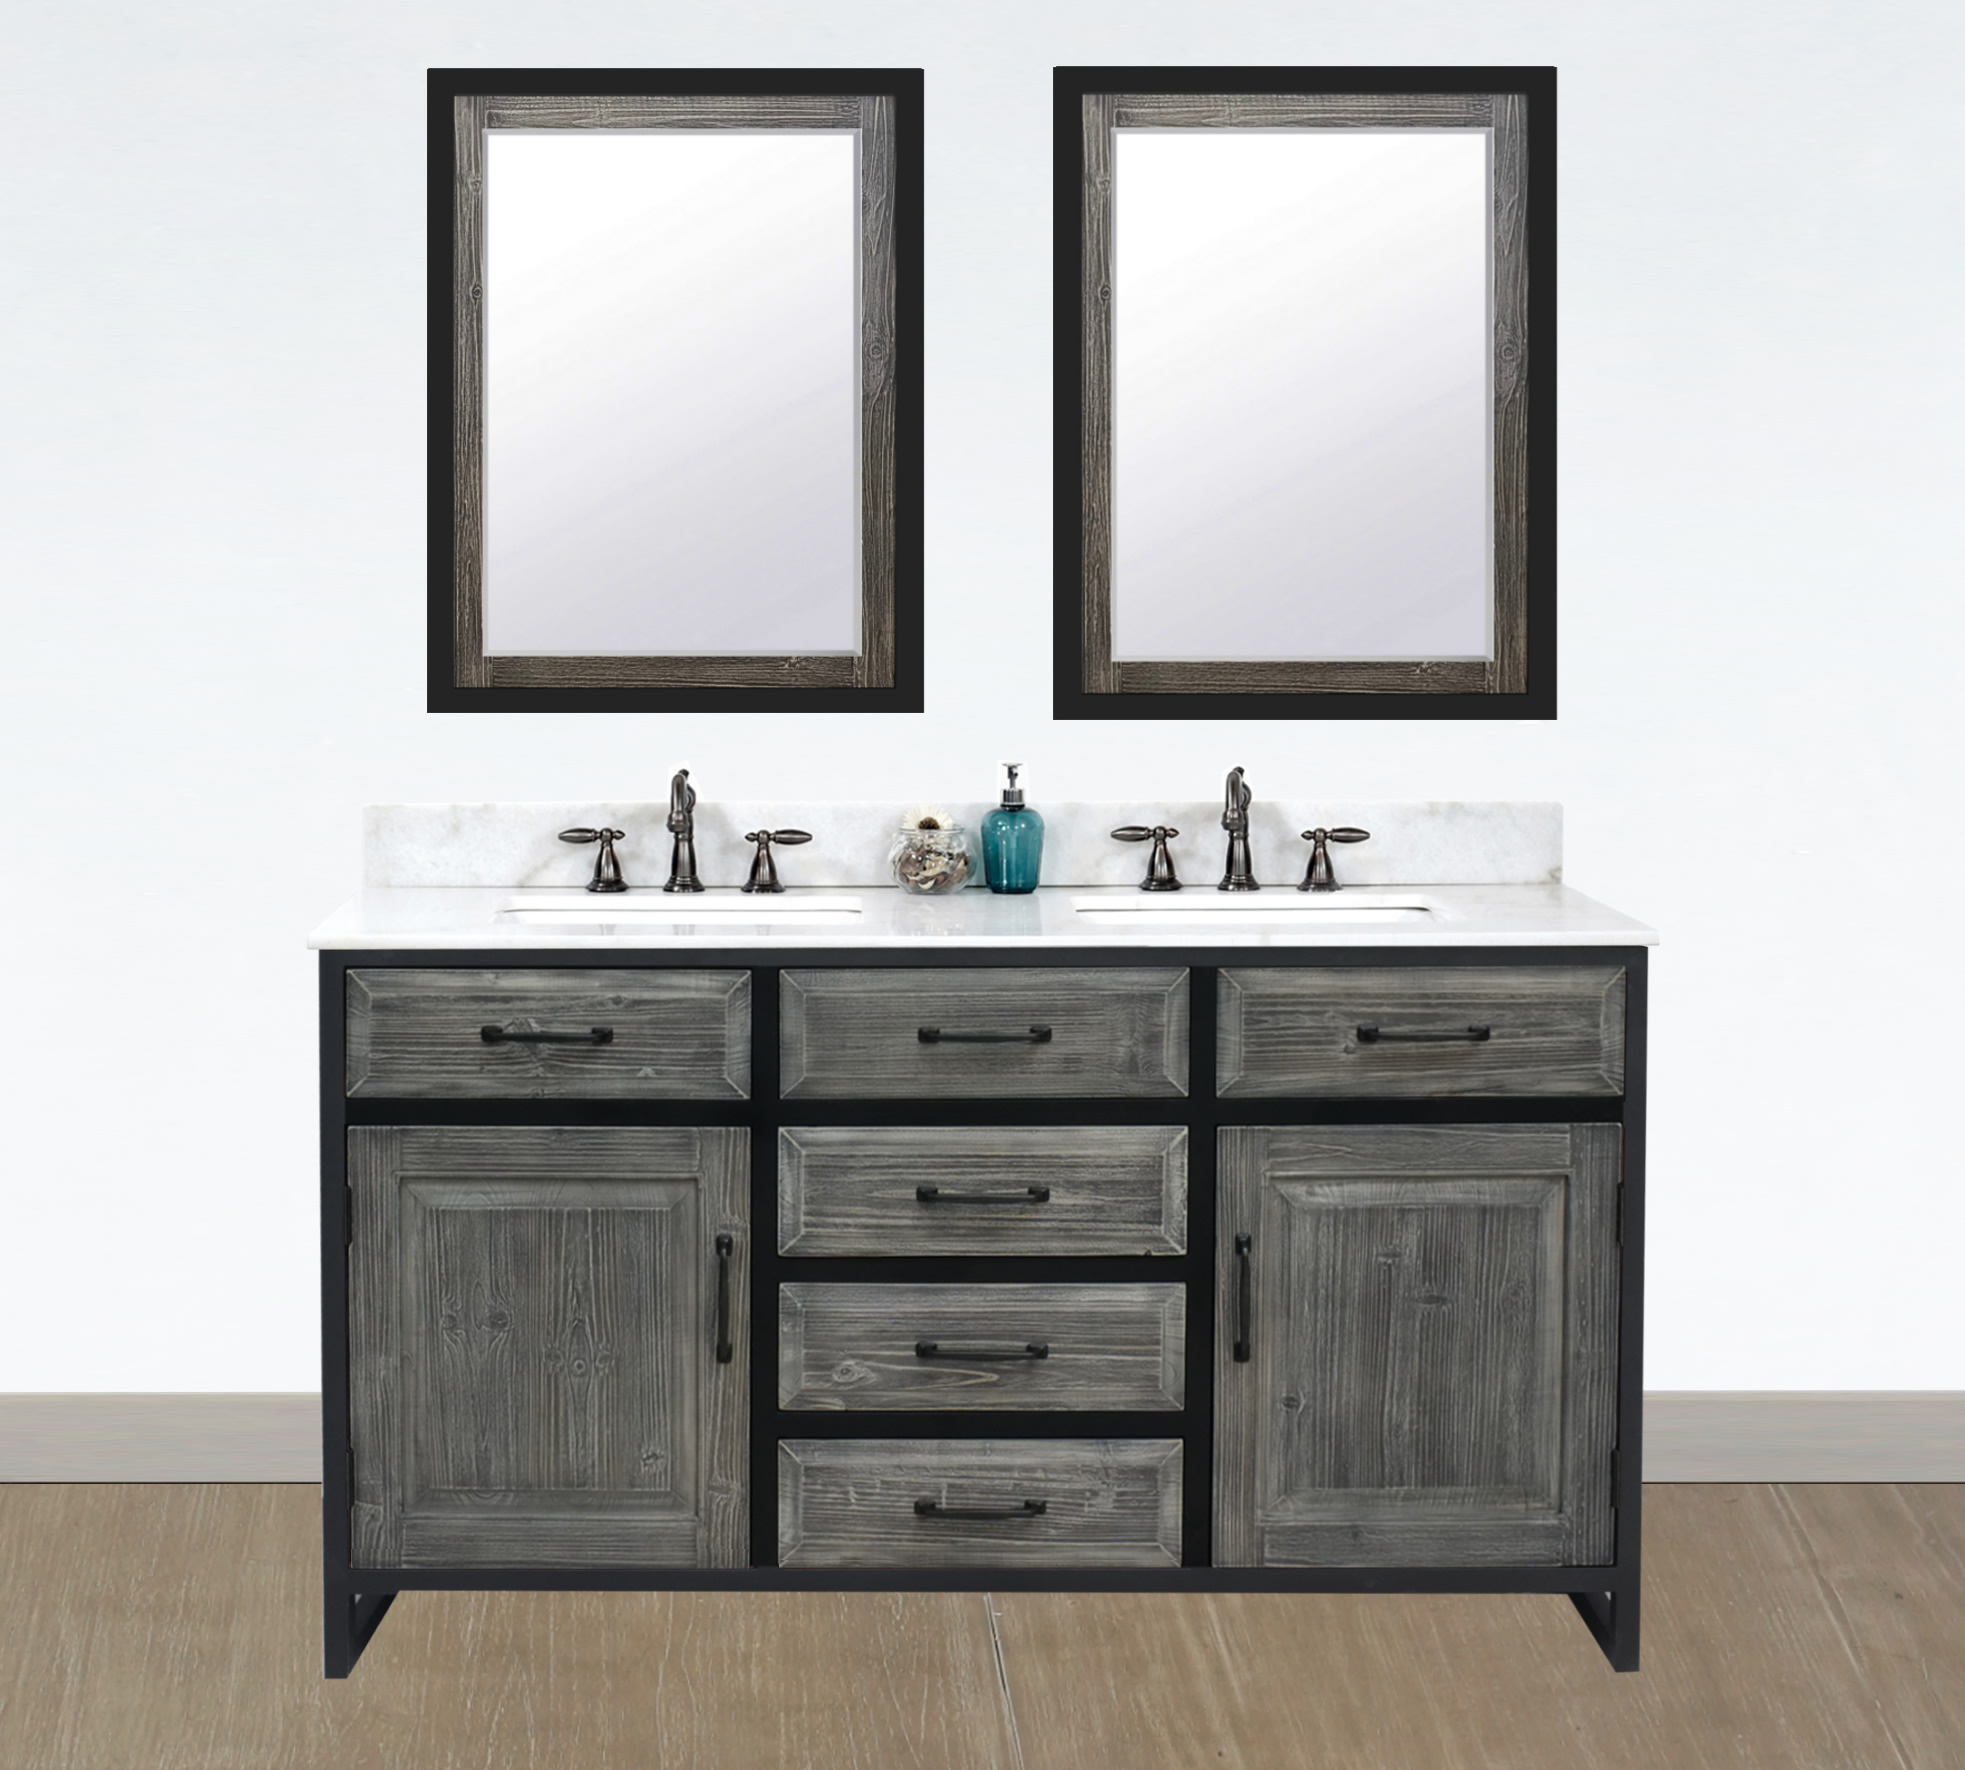 60" Rustic Solid Fir Double Sink with Iron Frame Vanity in Grey Driftwood - No Faucet with Countertop Options